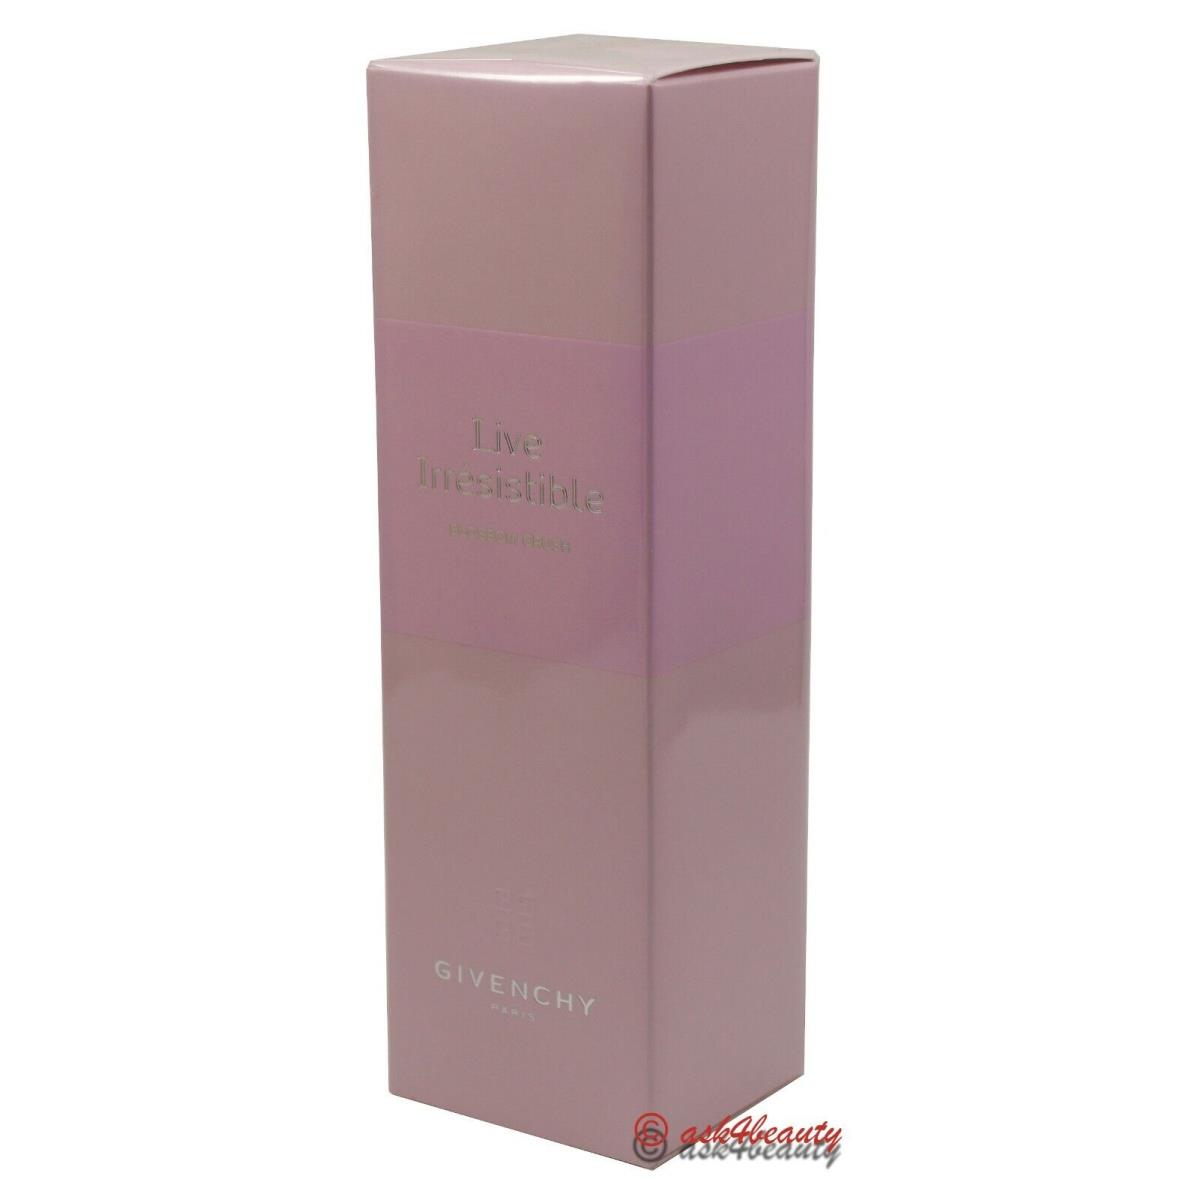 Live Irresistible Blossom Crush by Givenchy 2.5oz Edt Forwomen In Damagedbox